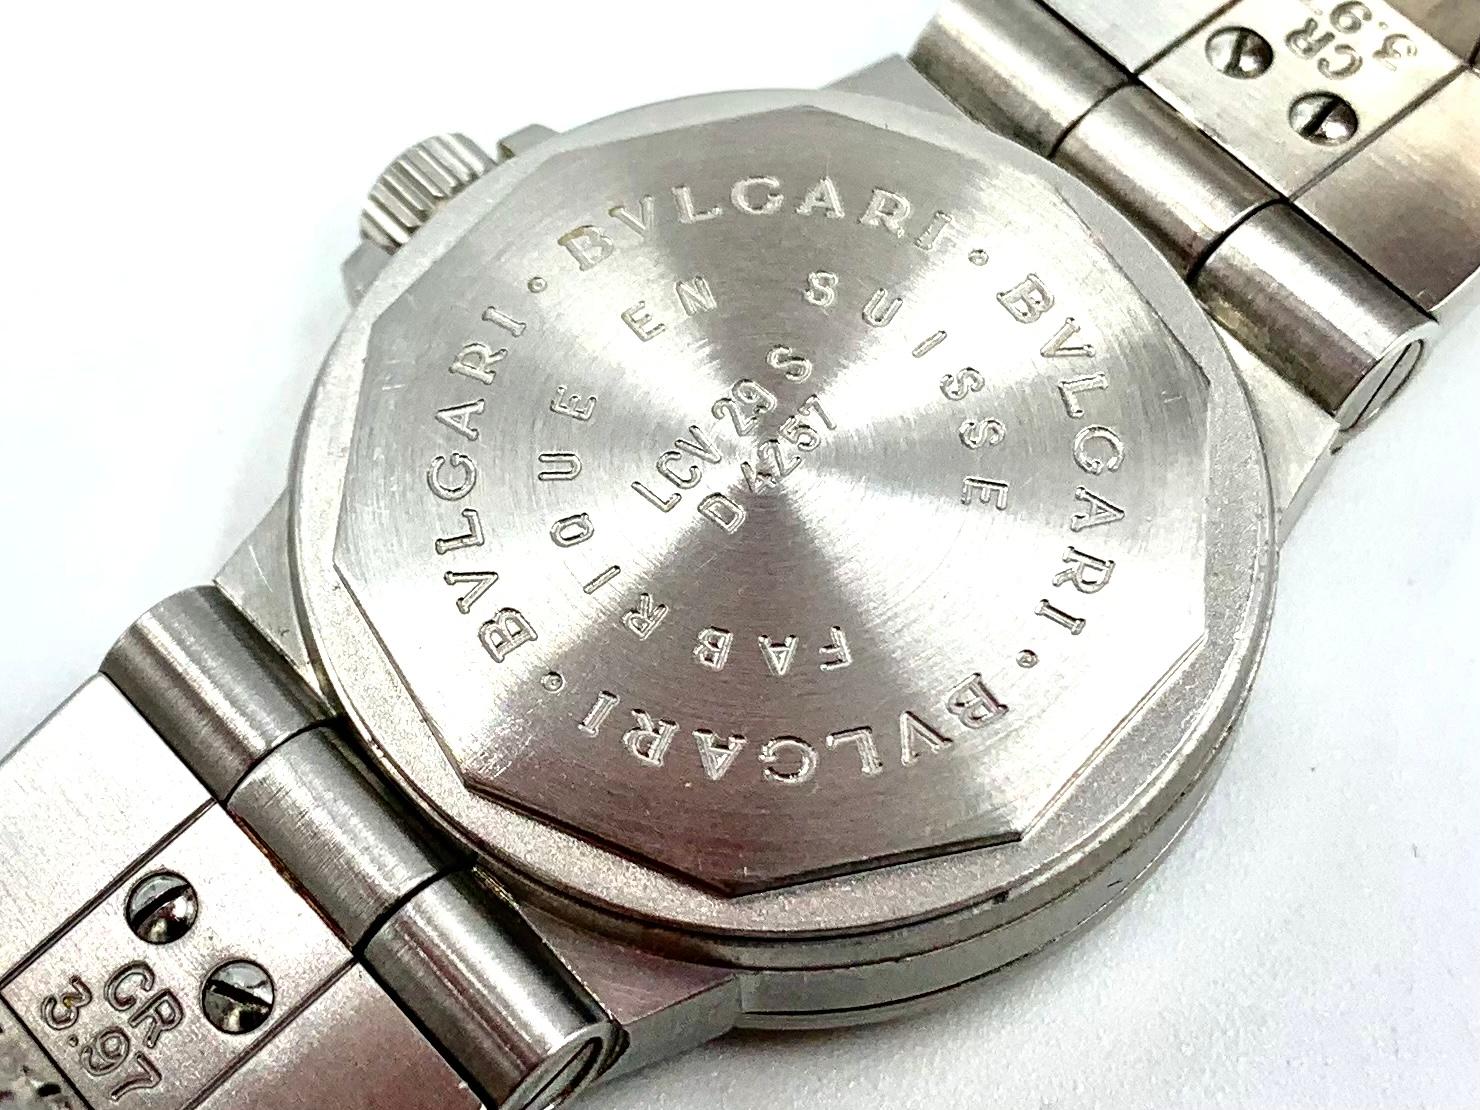 Classic Bulgari Diagono Automatic Stainless Steel case and bracelet ladies wristwatch. The name Diagono is inspired by the Greek agon, or competition. 
The distinctive oblique bezel design creates a dynamic, clean look perfect for today's modern,